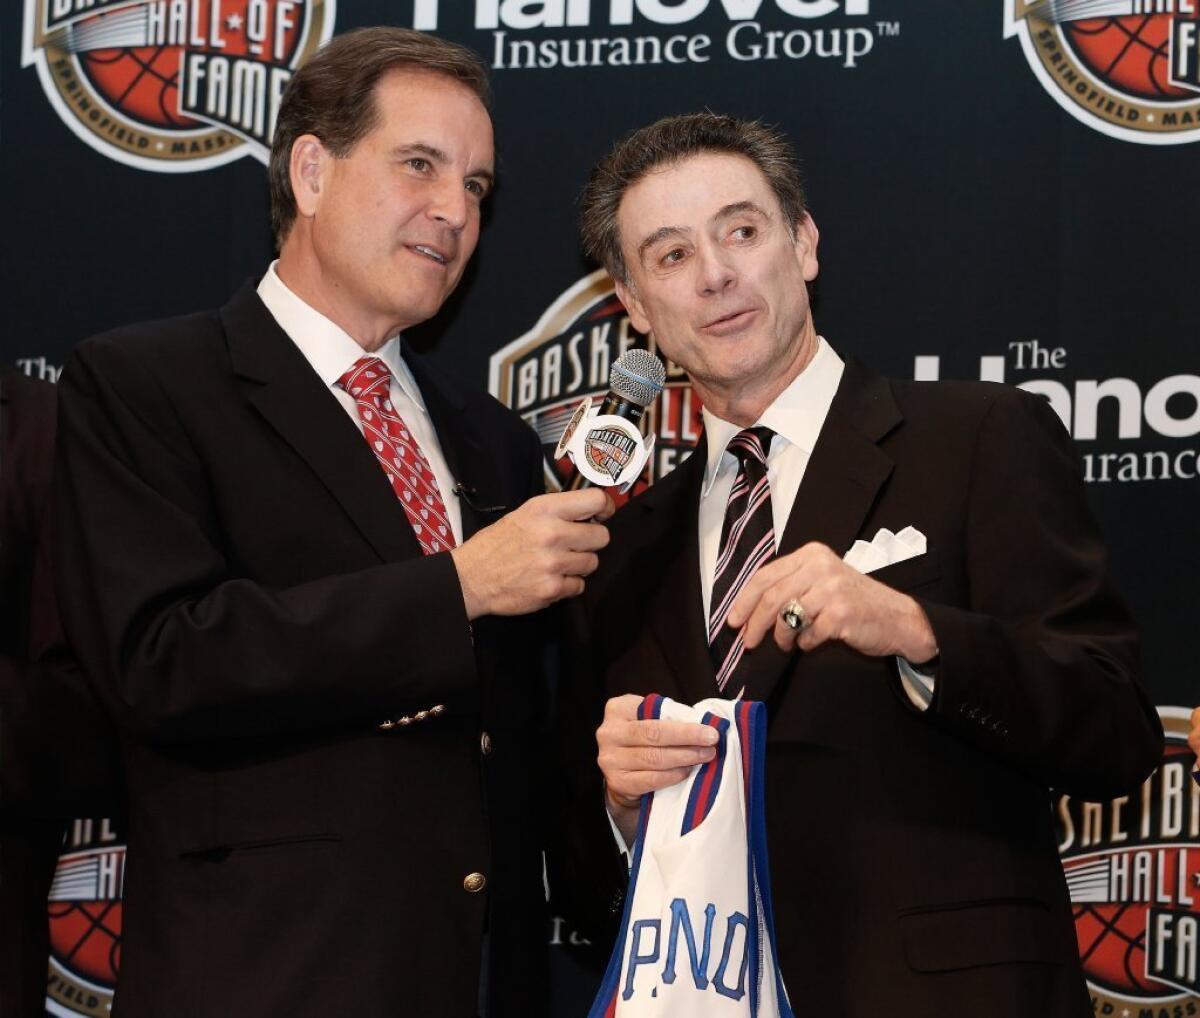 CBS broadcaster Jim Nance talks to Louisville Coach Rick Pitino during the Naismith Memorial Basketball Hall of Fame announcement ceremony.